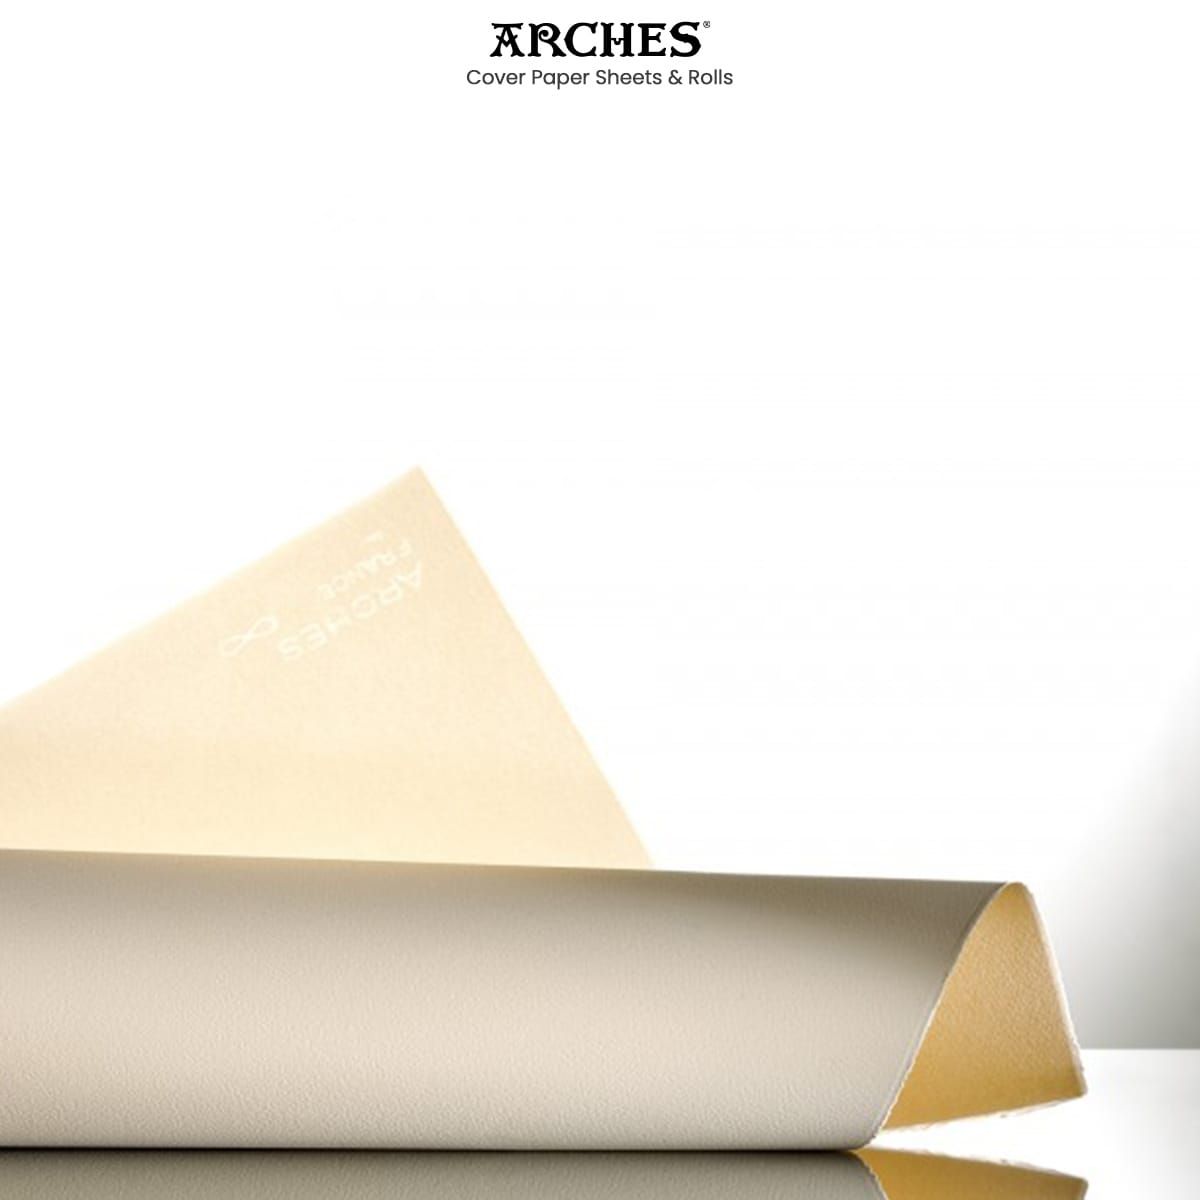 Arches Cover Paper Sheets & Rolls